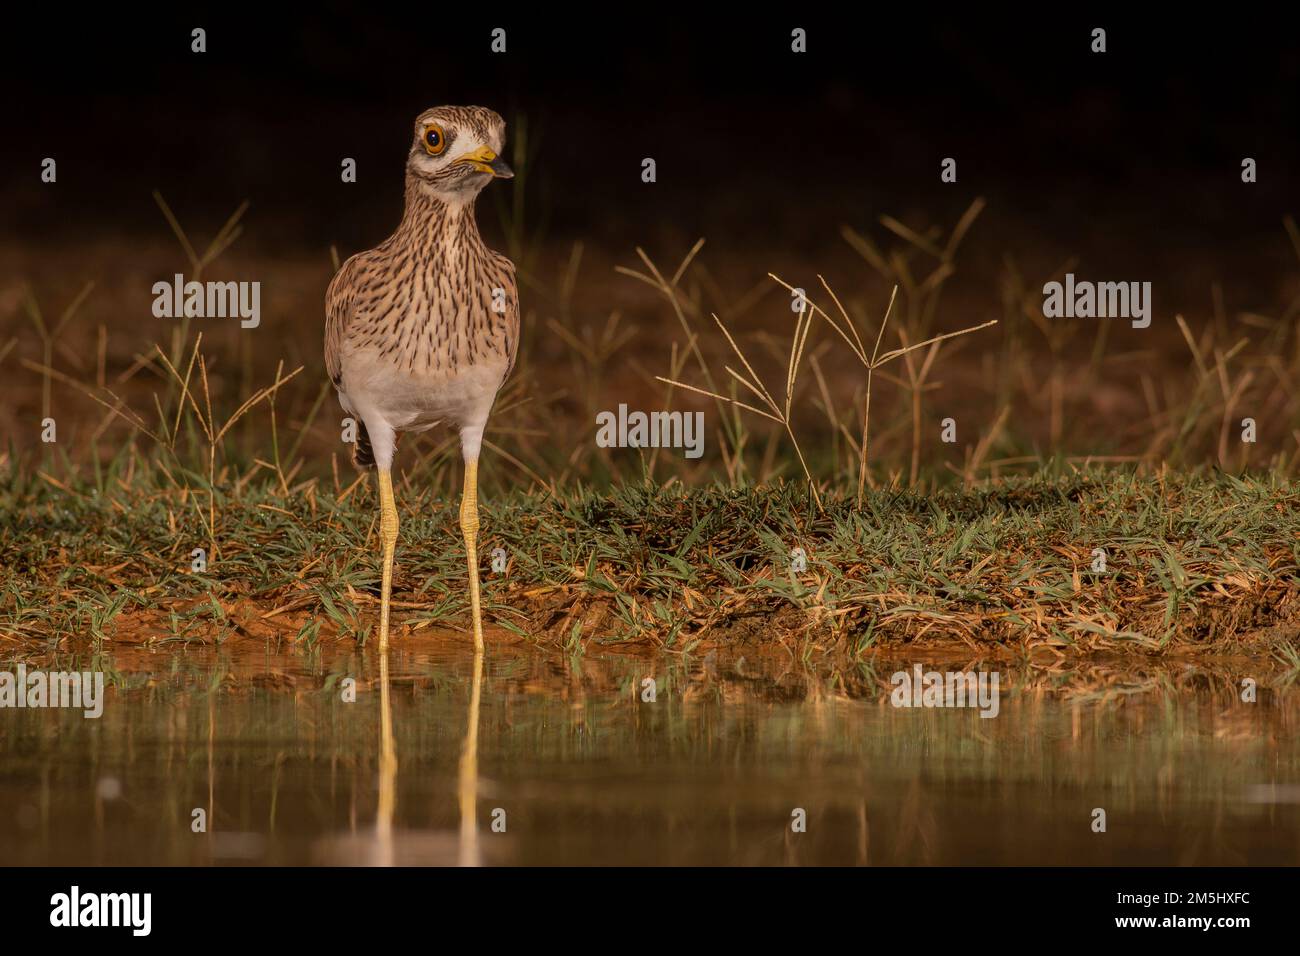 Stone Curlew, Eurasian Thick-knee, or Eurasian Stone-curlew (Burhinus oedicnemus). This wading bird is found in dry open scrublands of Europe, north A Stock Photo